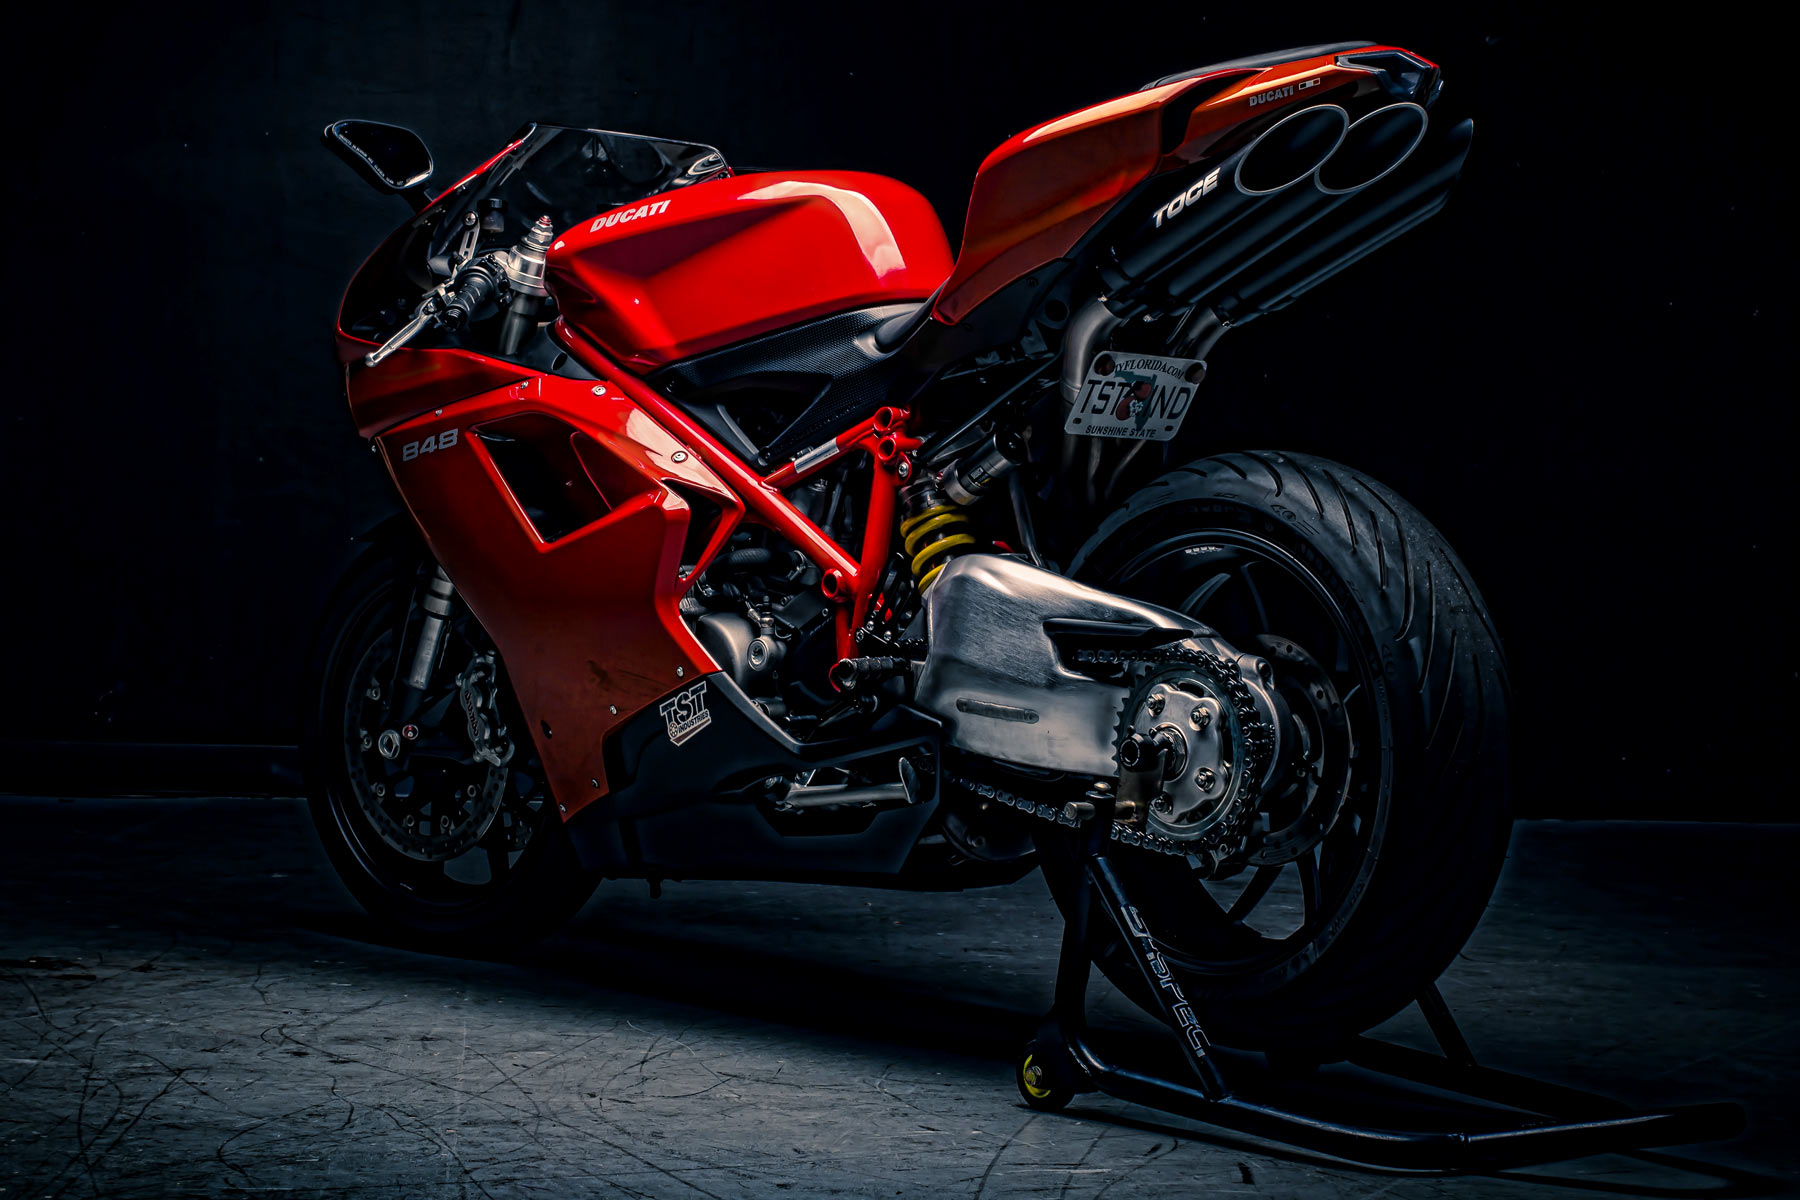 Professional photoshoot of a Ducati 848 performed by TST's own Director of Photography, Marc-Anthony Brown.